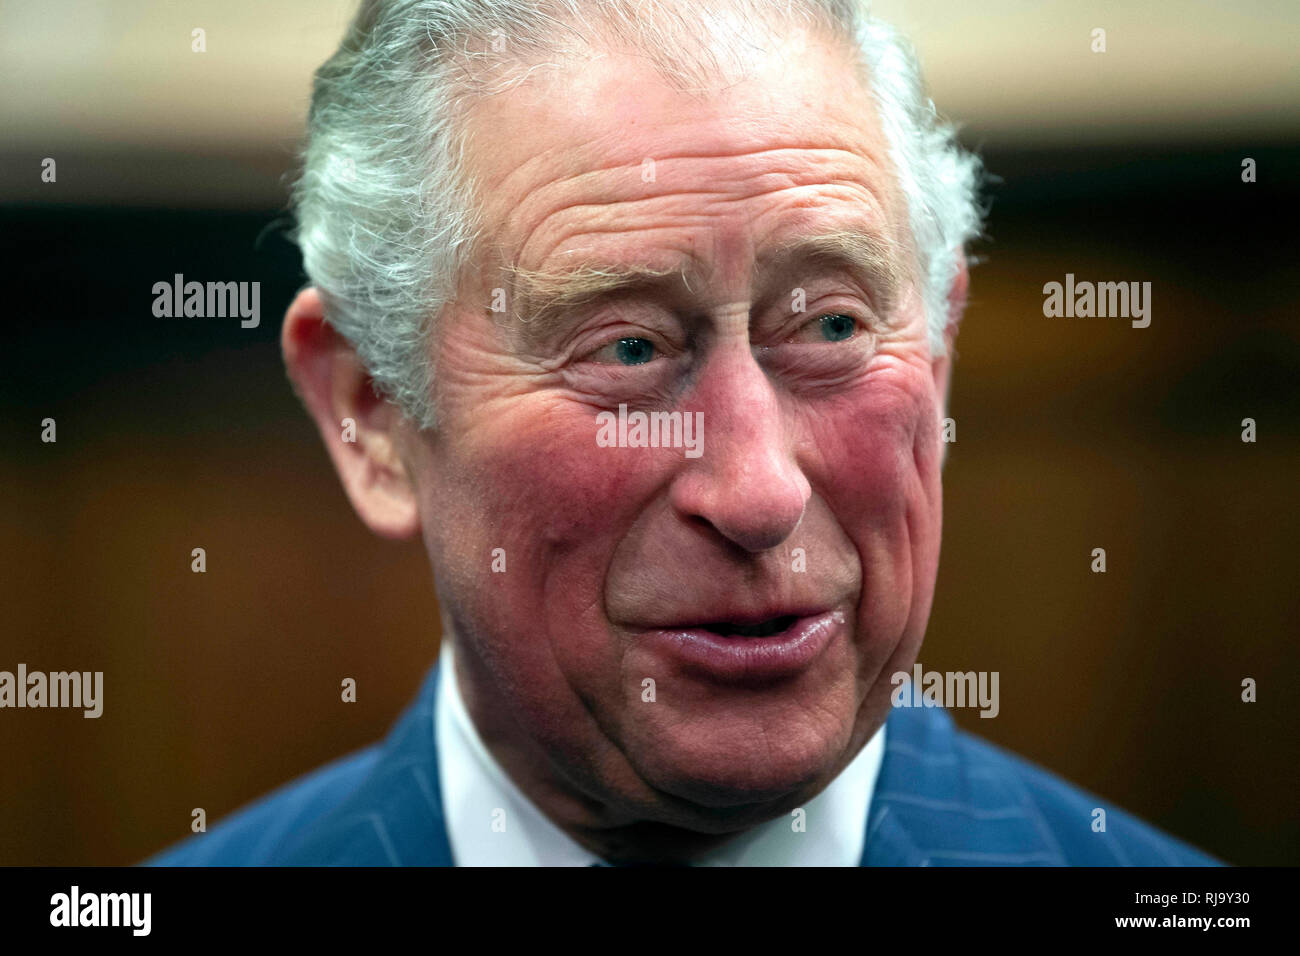 The Prince of Wales during a visit to The Supreme Court of the United Kingdom in Parliament Square, London, to commemorate its 10th anniversary. Stock Photo